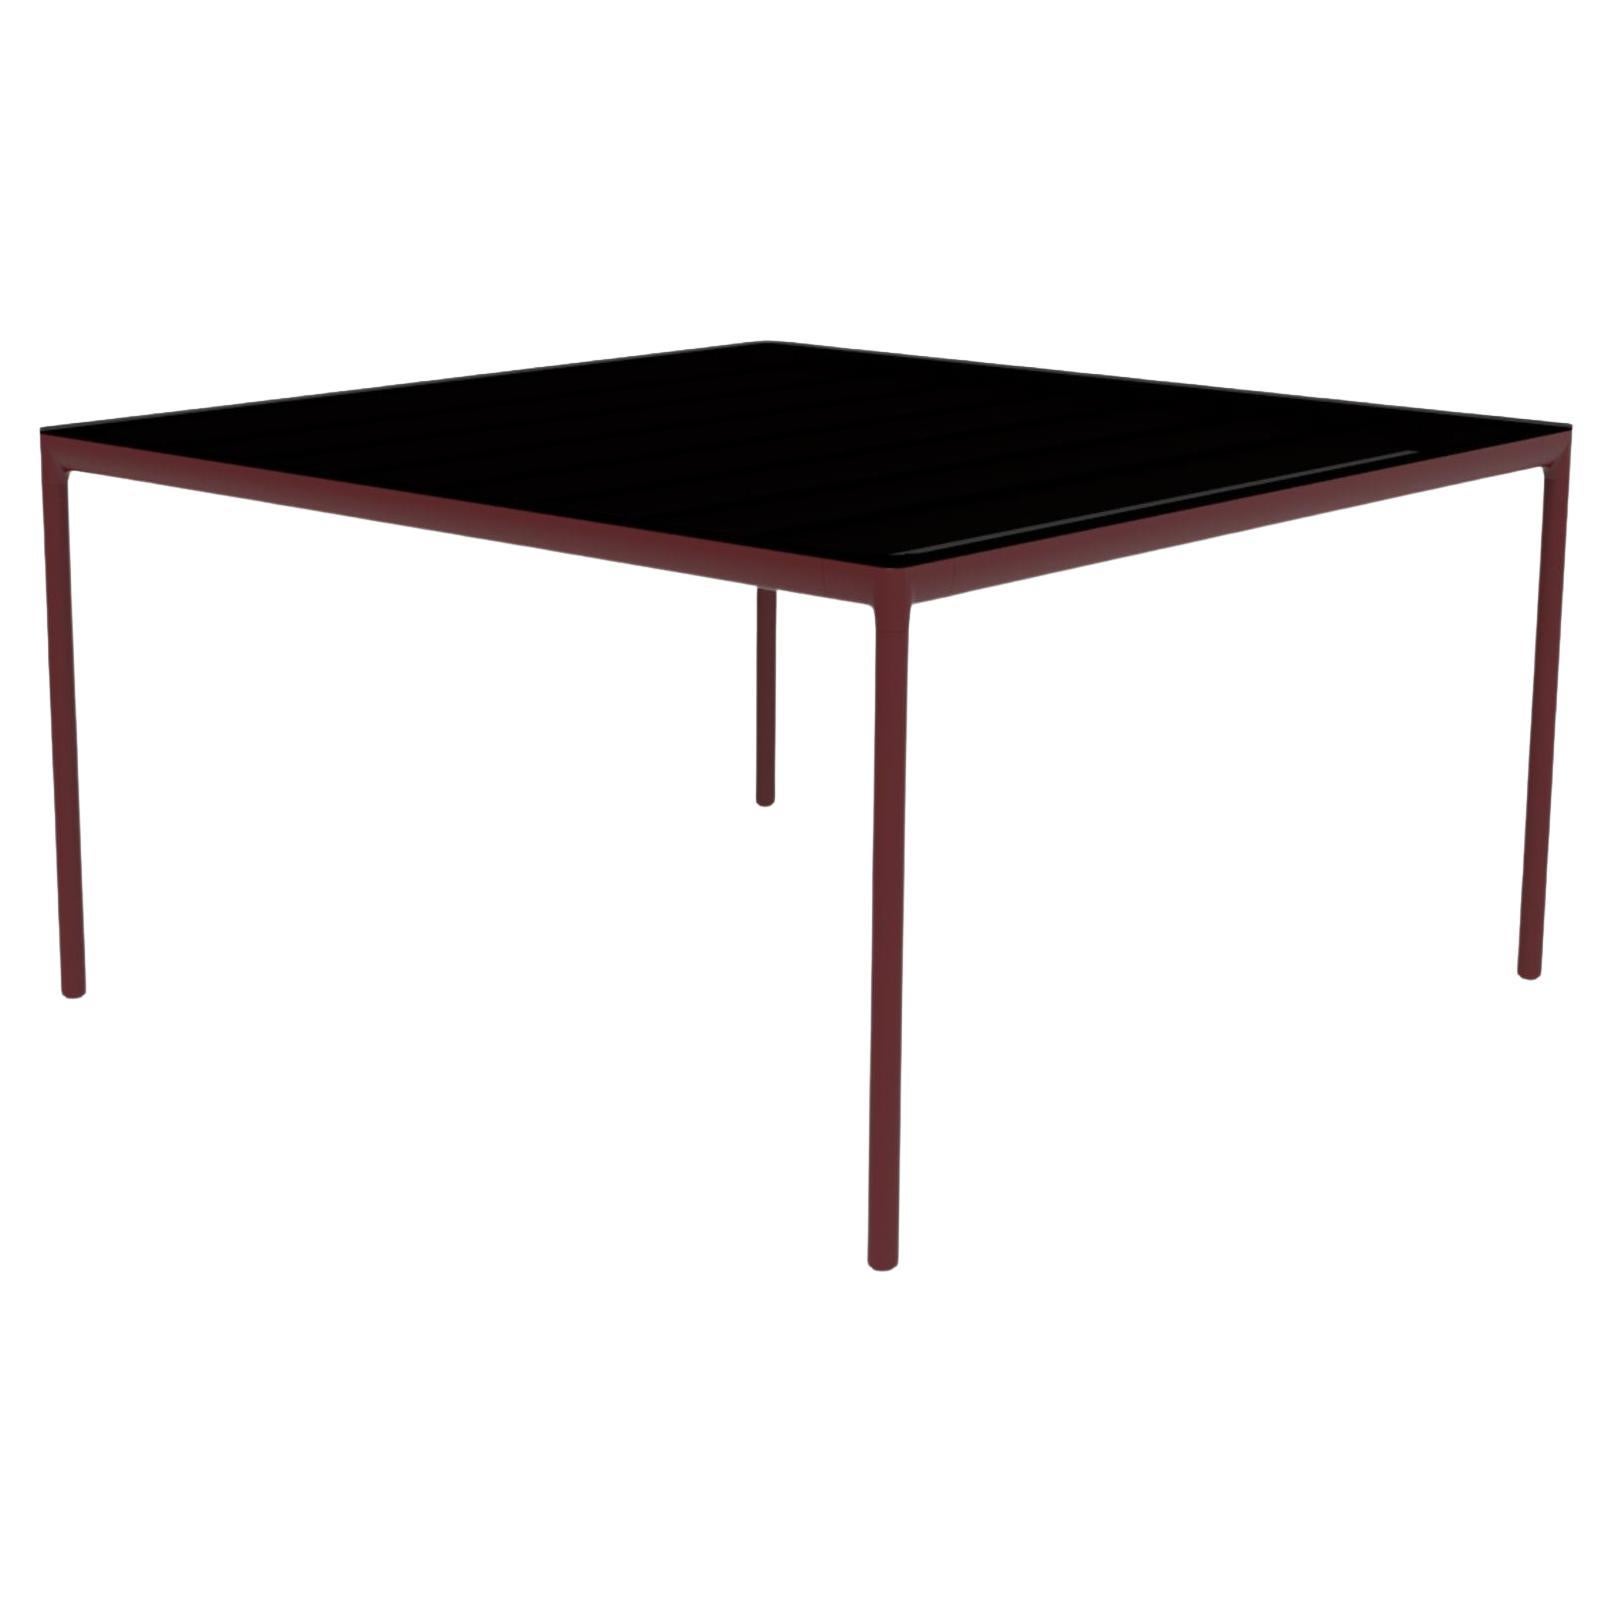 Ribbons Burgundy 138 Coffee Table by Mowee For Sale